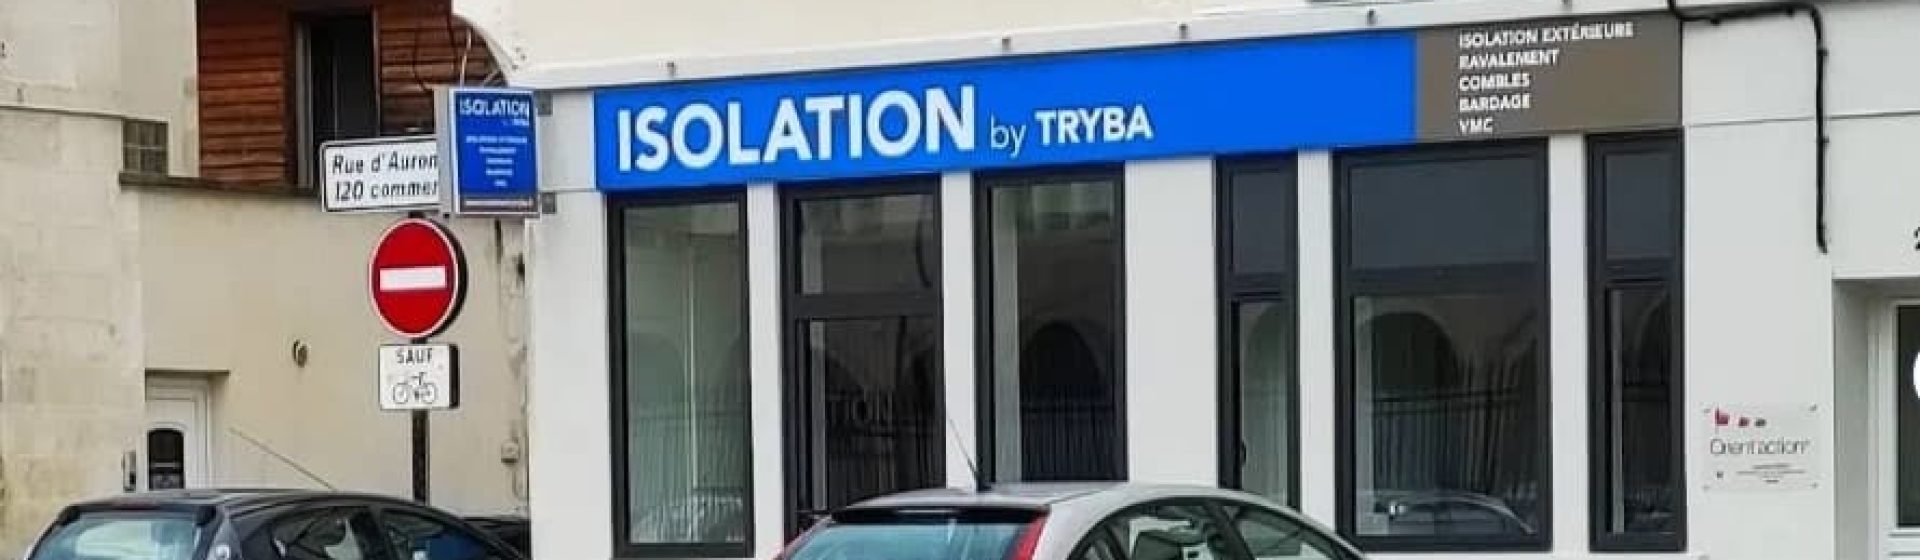 Isolation by Tryba